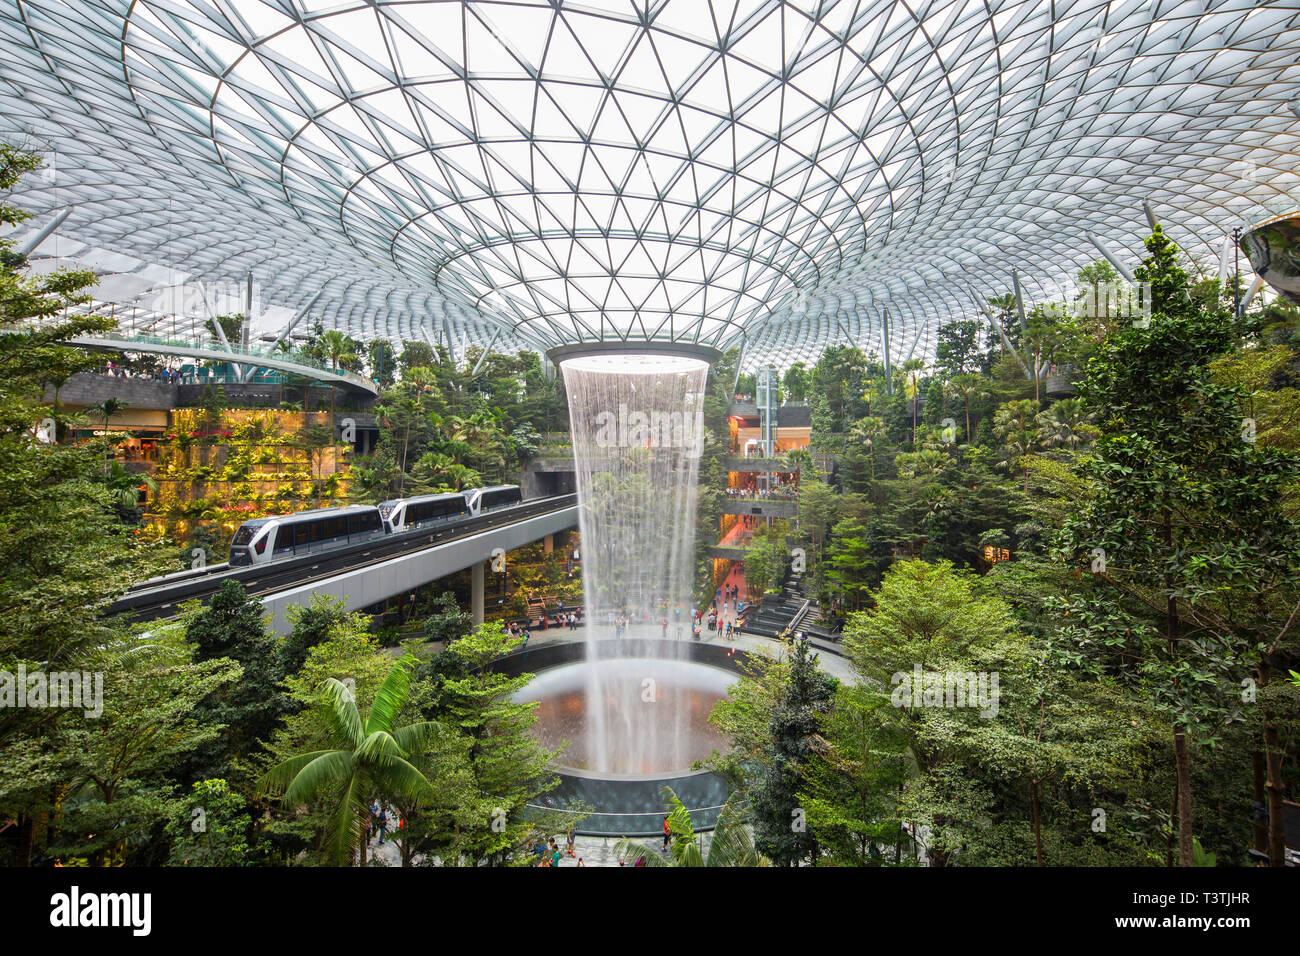 Safdie's Jewel Changi Airport Nears Completion, Featuring the